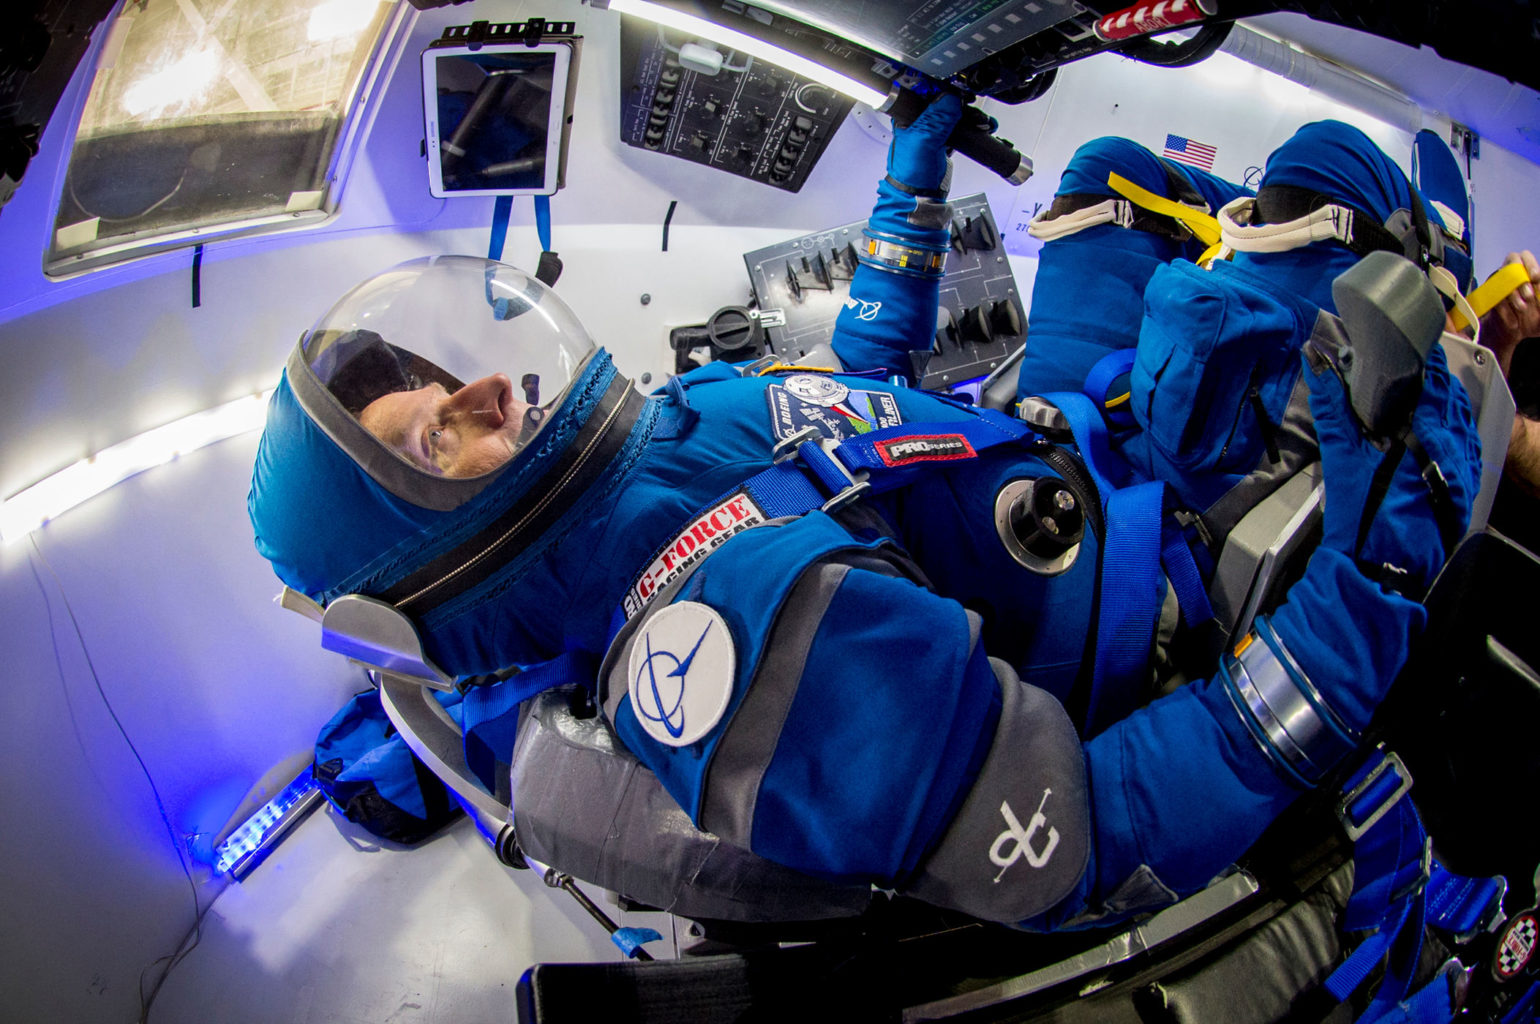 BOEING’S NEW STARLINER SPACESUITS